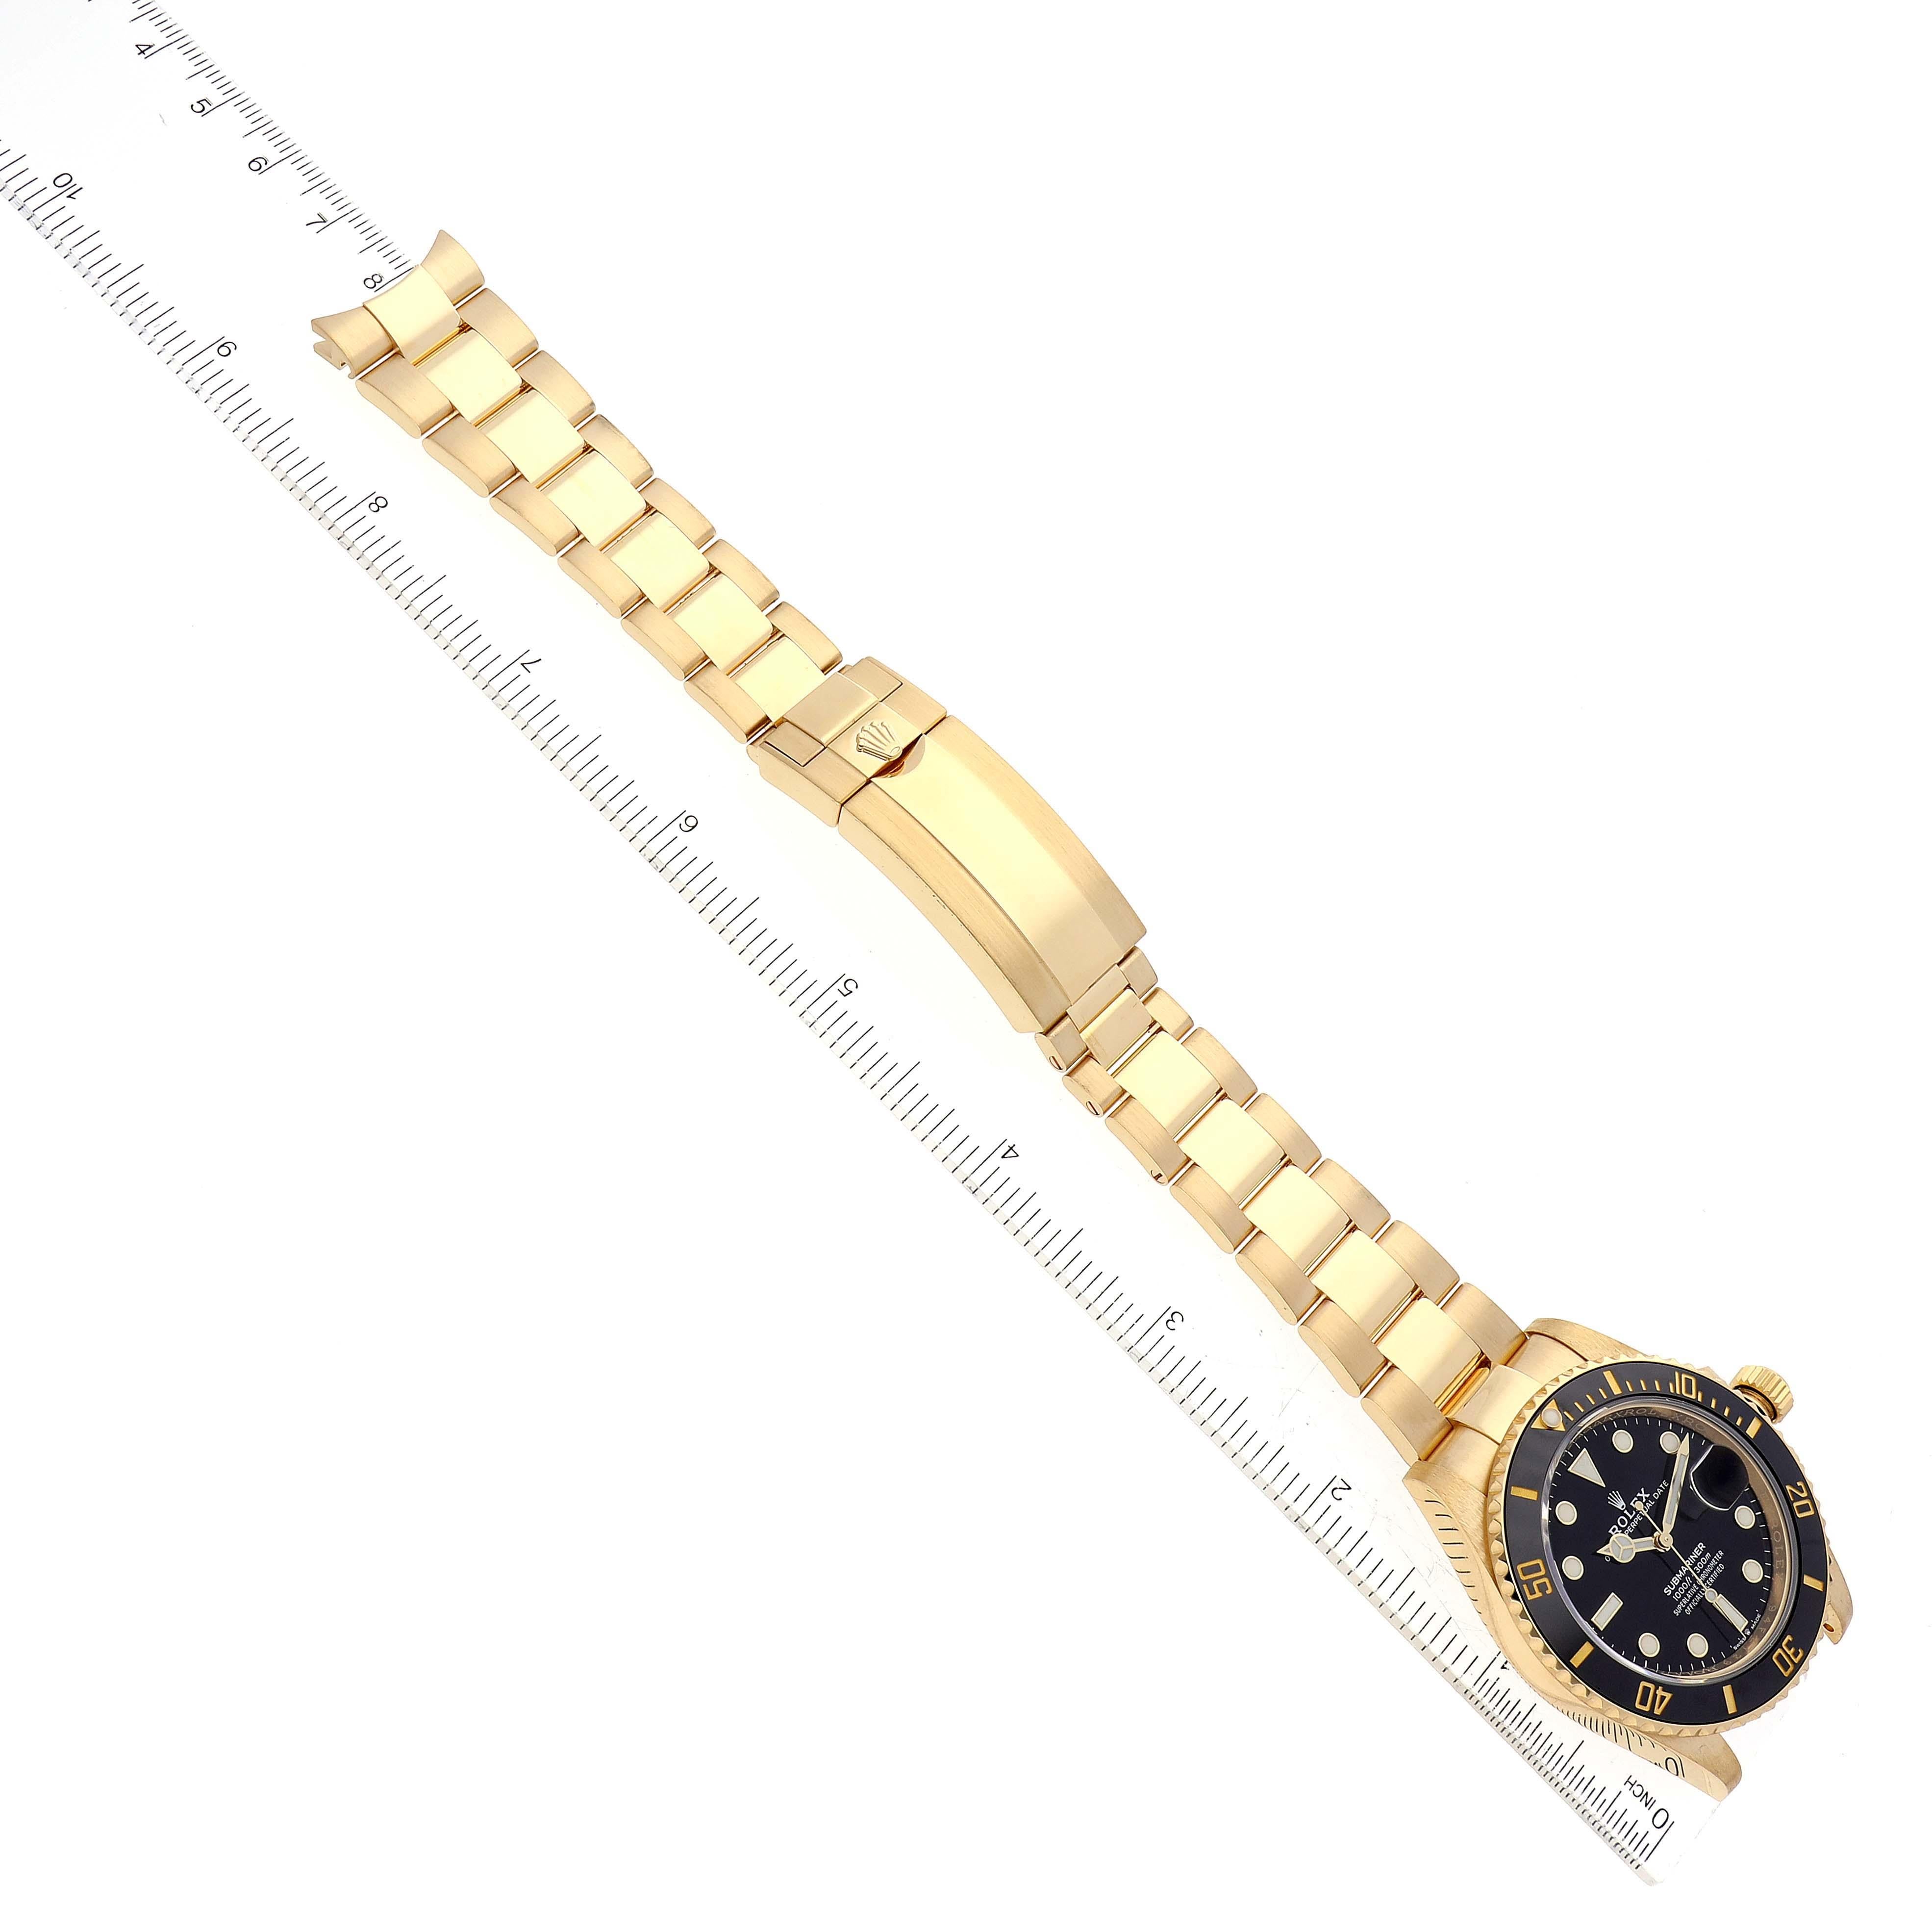 Rolex Submariner Yellow Gold Black Dial Bezel Mens Watch 126618 Box Card For Sale 8